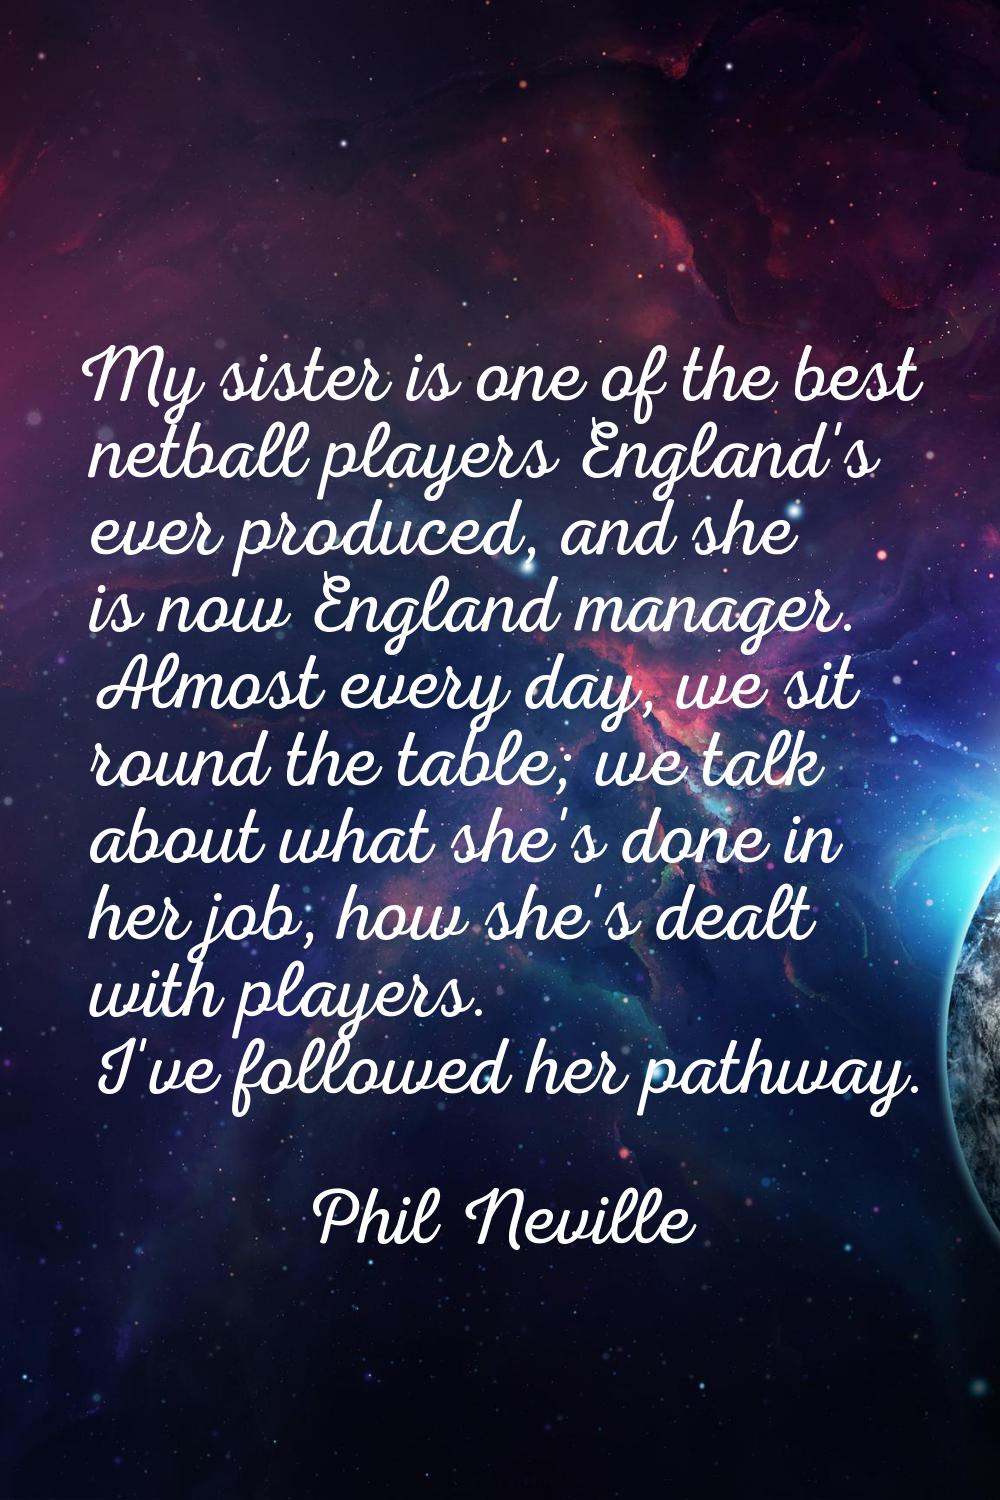 My sister is one of the best netball players England's ever produced, and she is now England manage